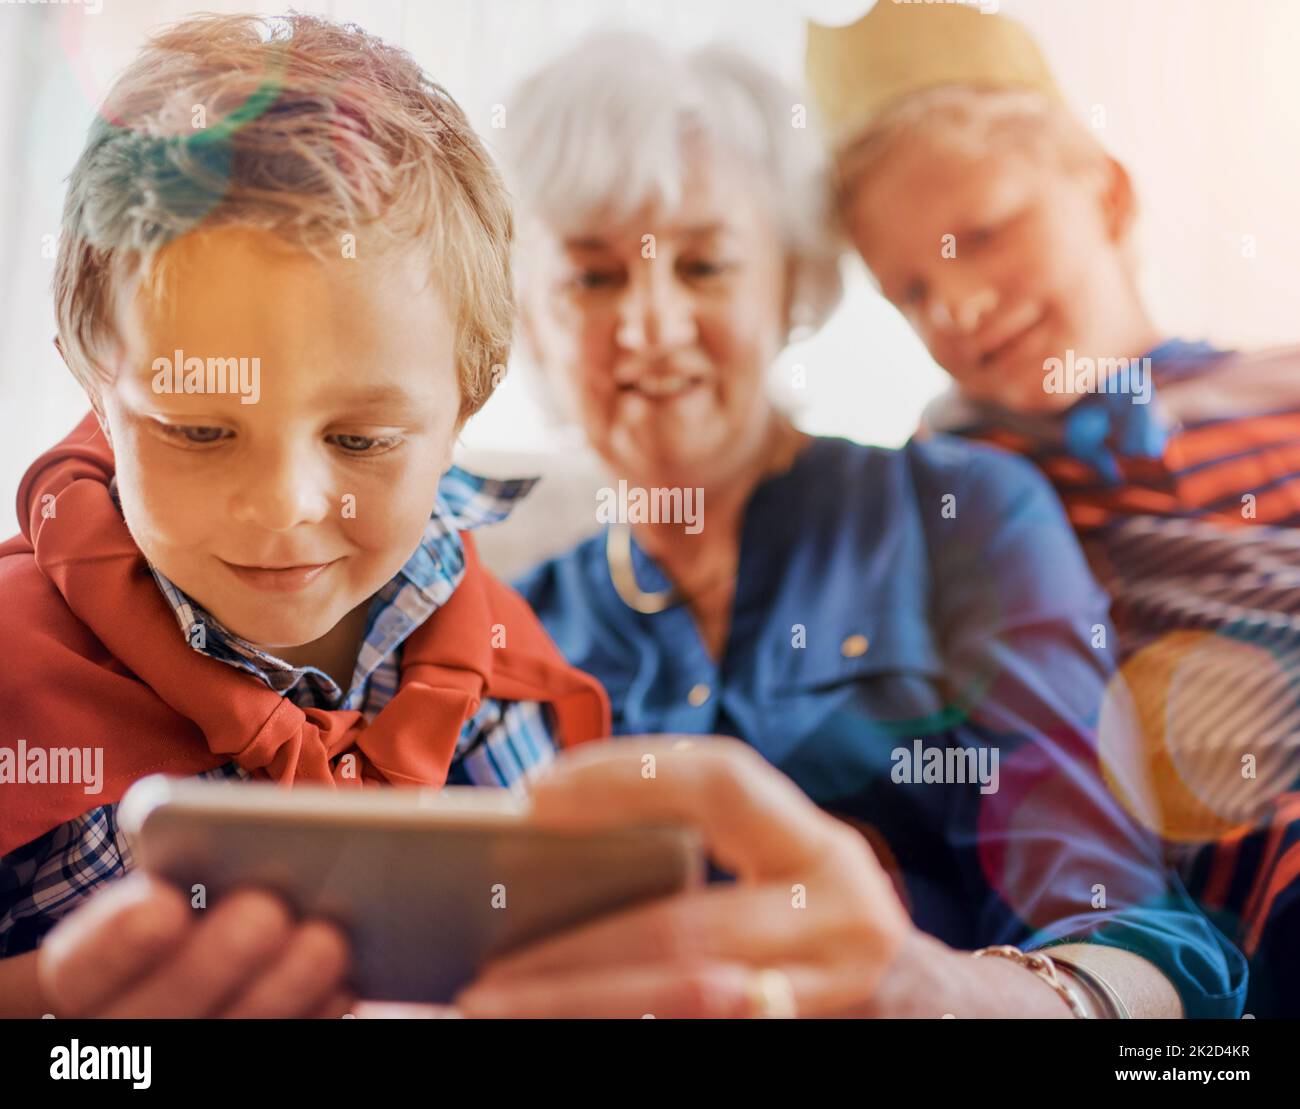 Grannys cellphone is his favorite toy. Shot of a senior woman spending time wither her grandsons. Stock Photo